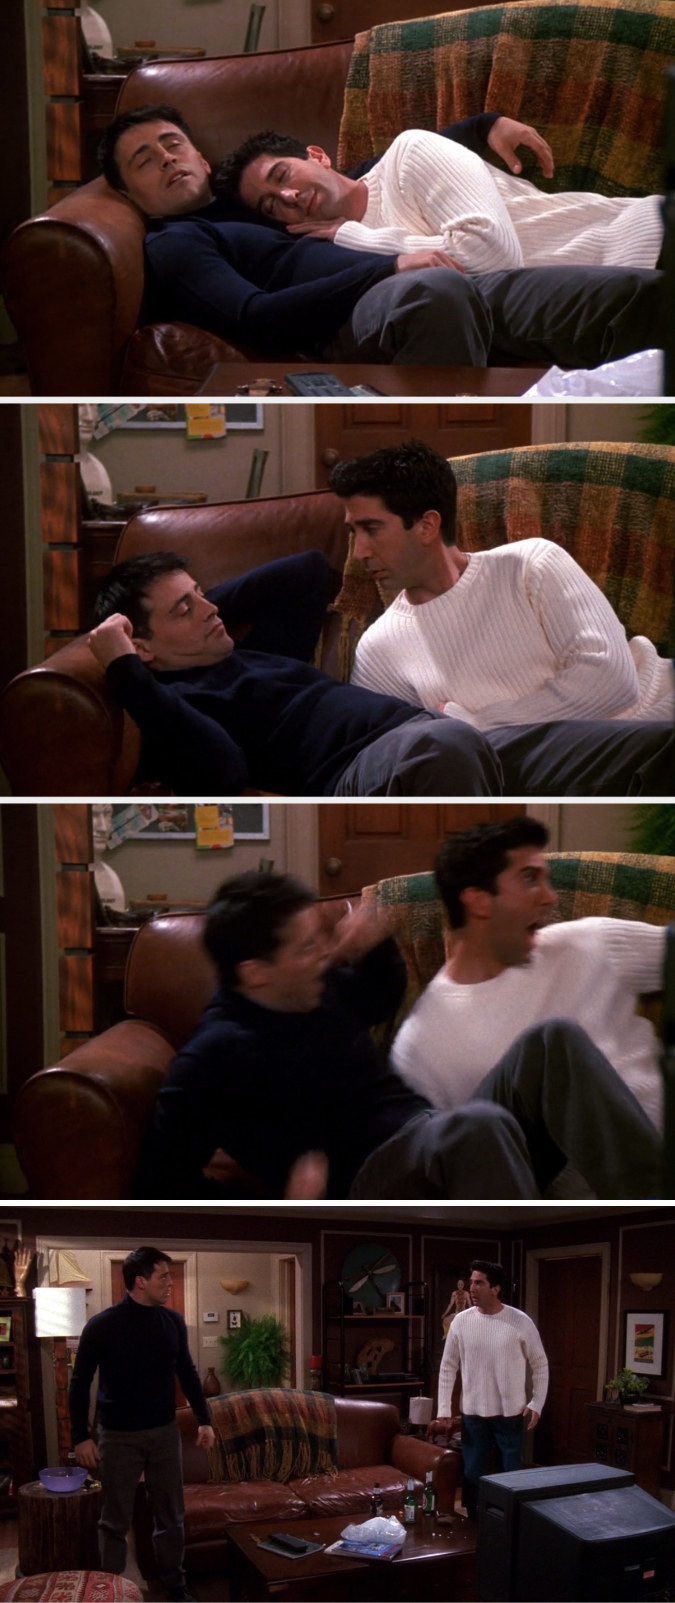 Joey and Ross look very comfortable napping together and cuddling, then they realize they&#x27;re napping together and cuddling, and they scream and jump up 